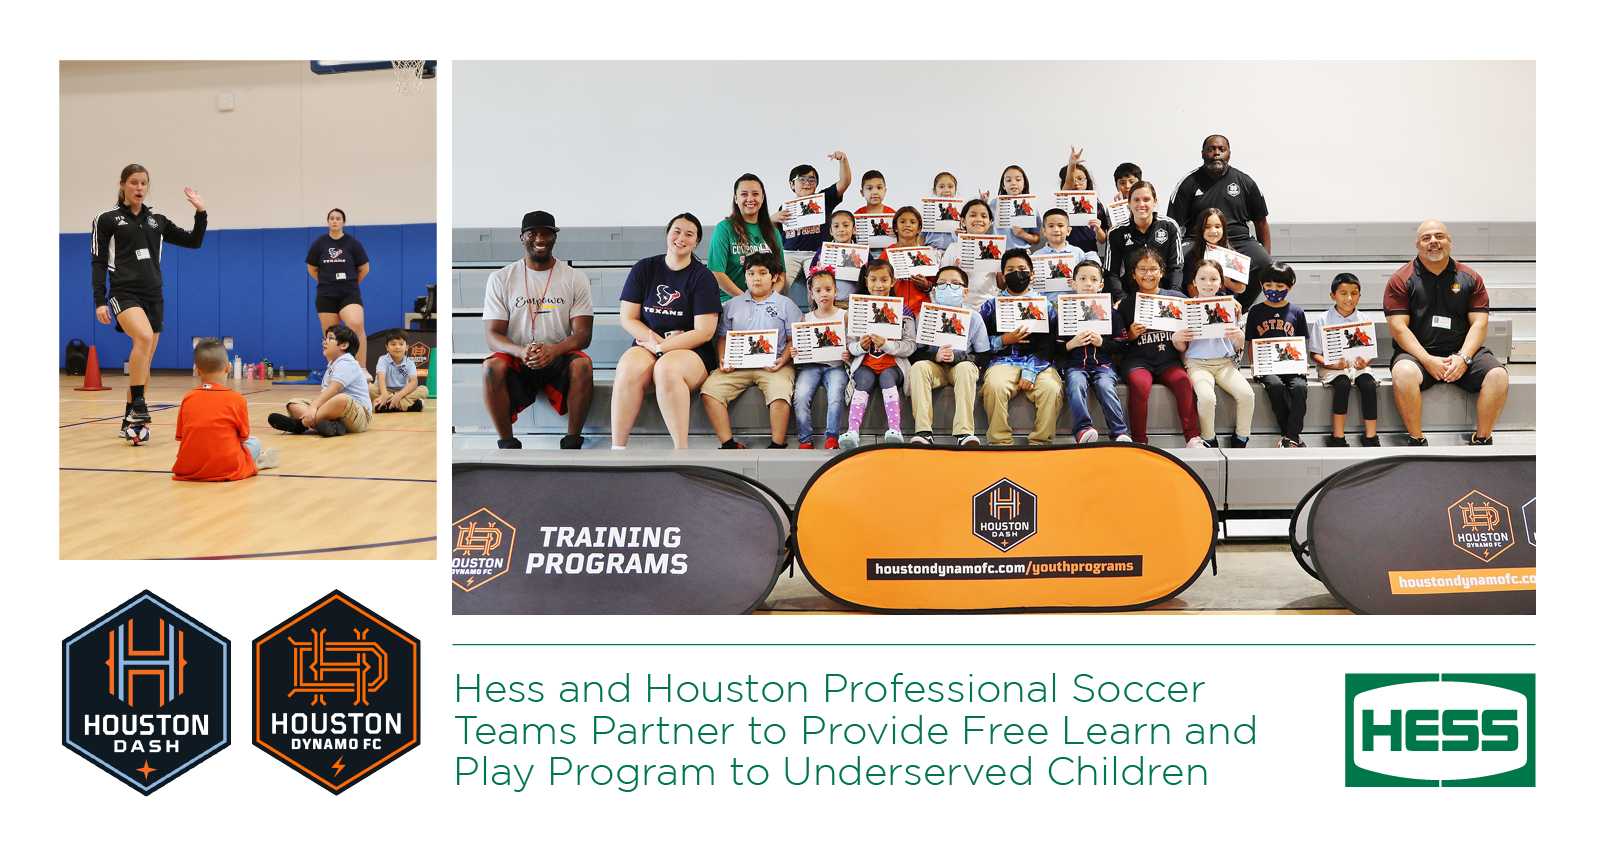 Hess Partners with Houston Dynamo and Dash to Provide Camp for Underserved Children